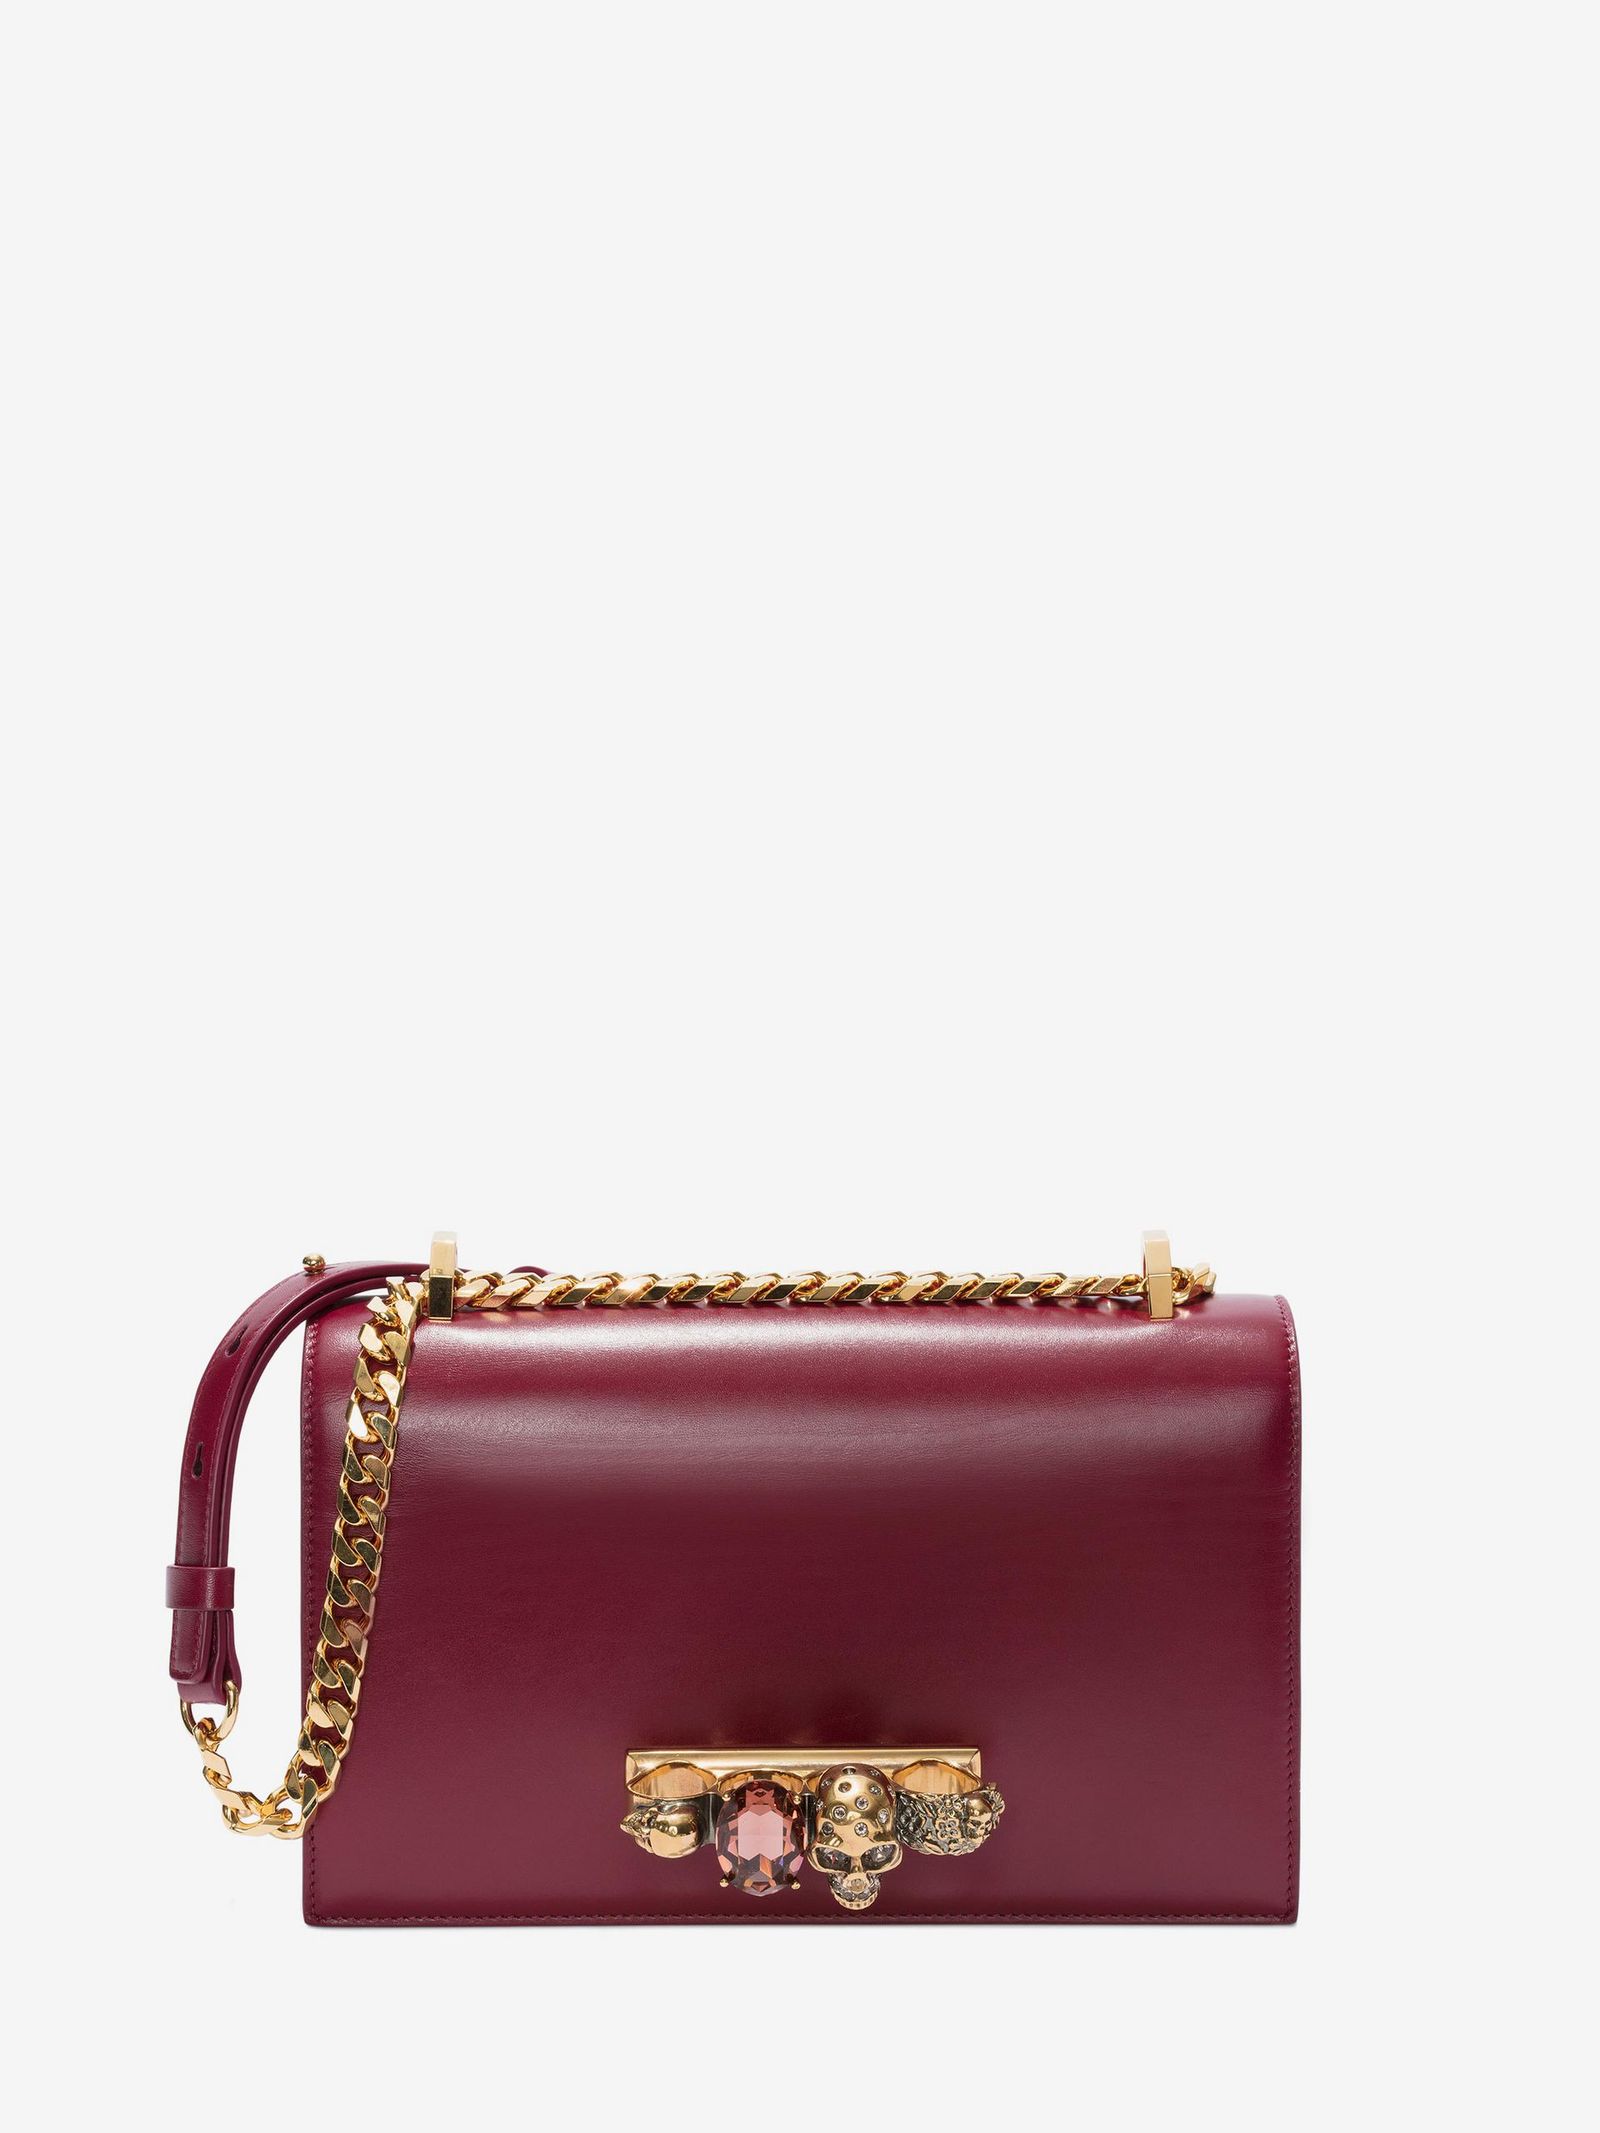 This New Alexander McQueen Bag Is About to Be Huge | Who What Wear